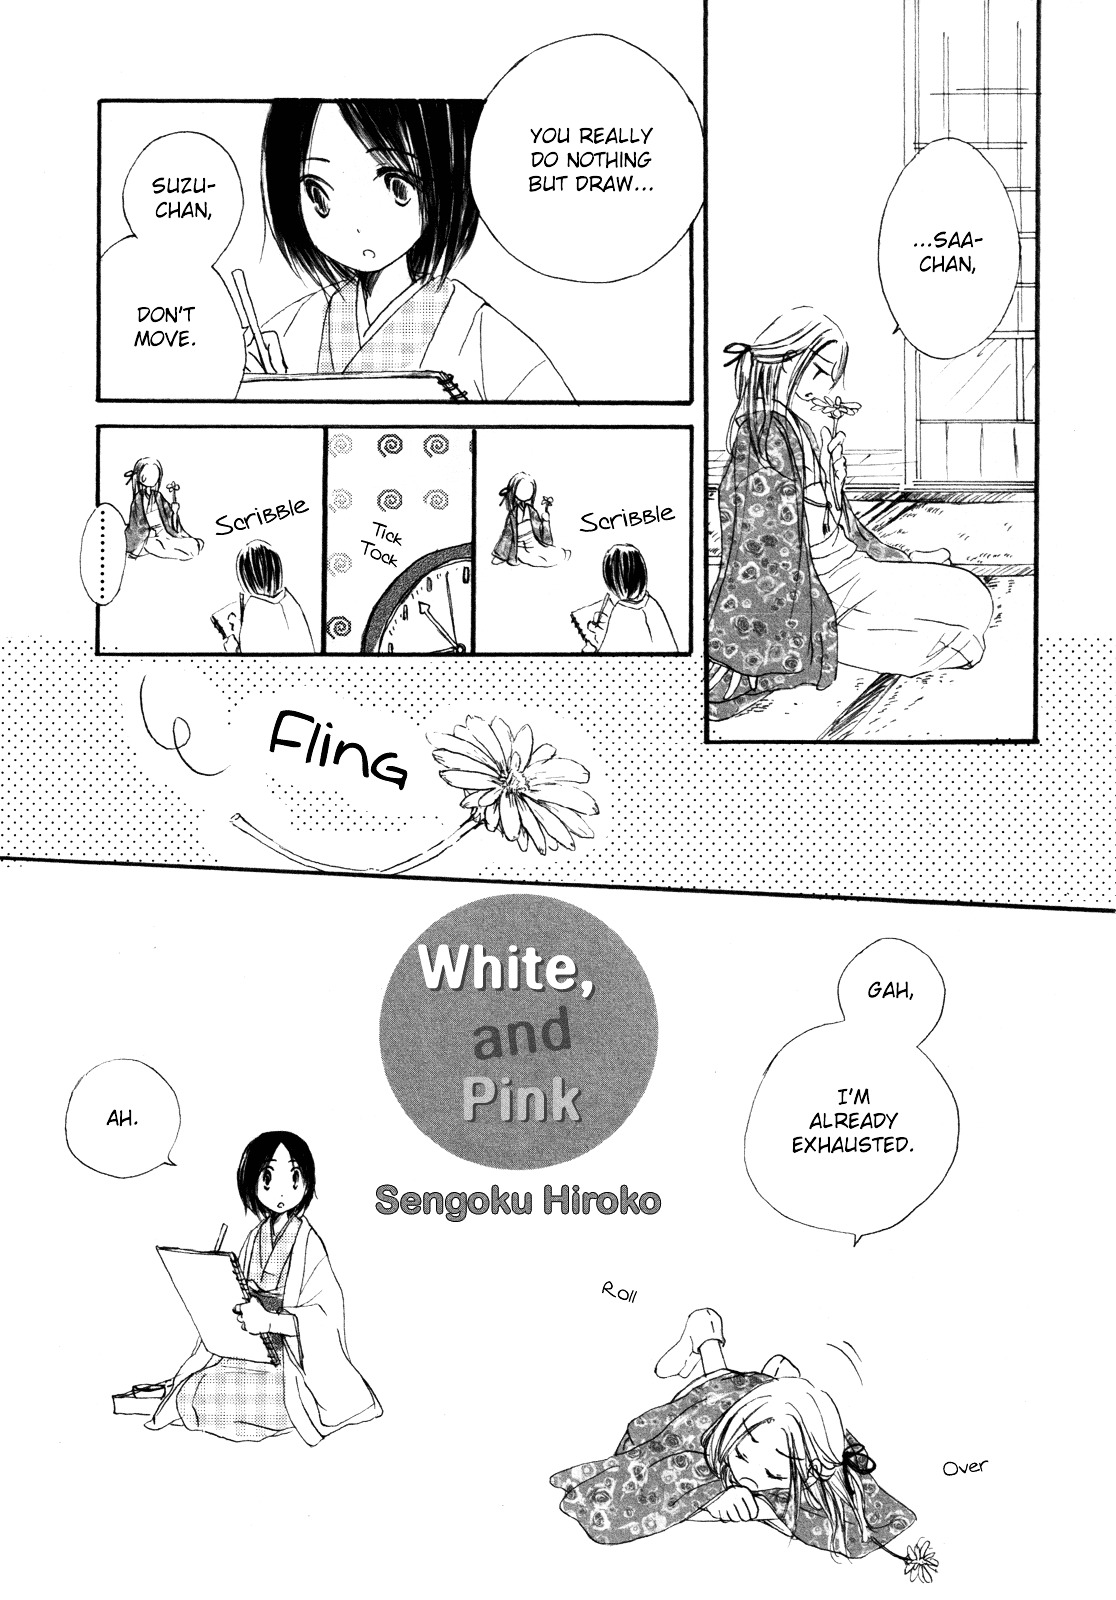 White, And Pink - Page 2